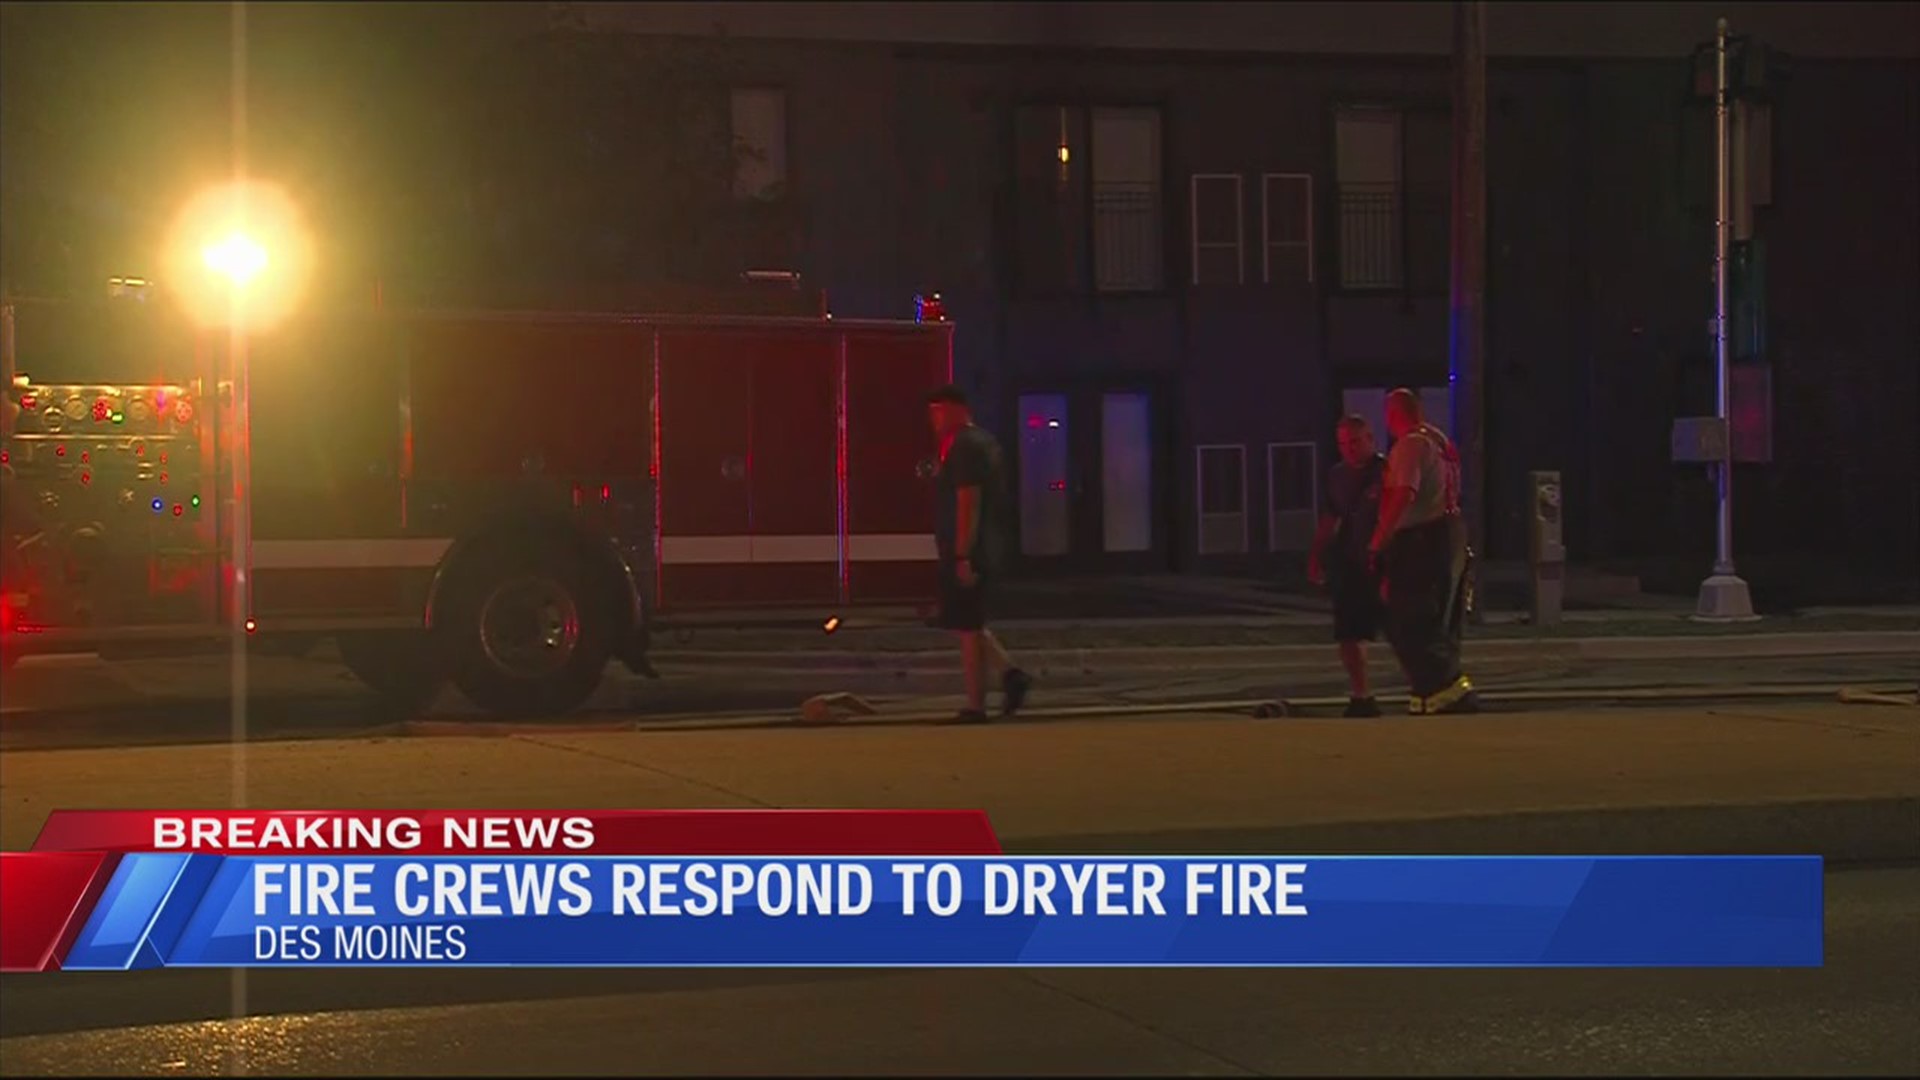 Fire crews respond to a dryer fire at home in Des Moines.